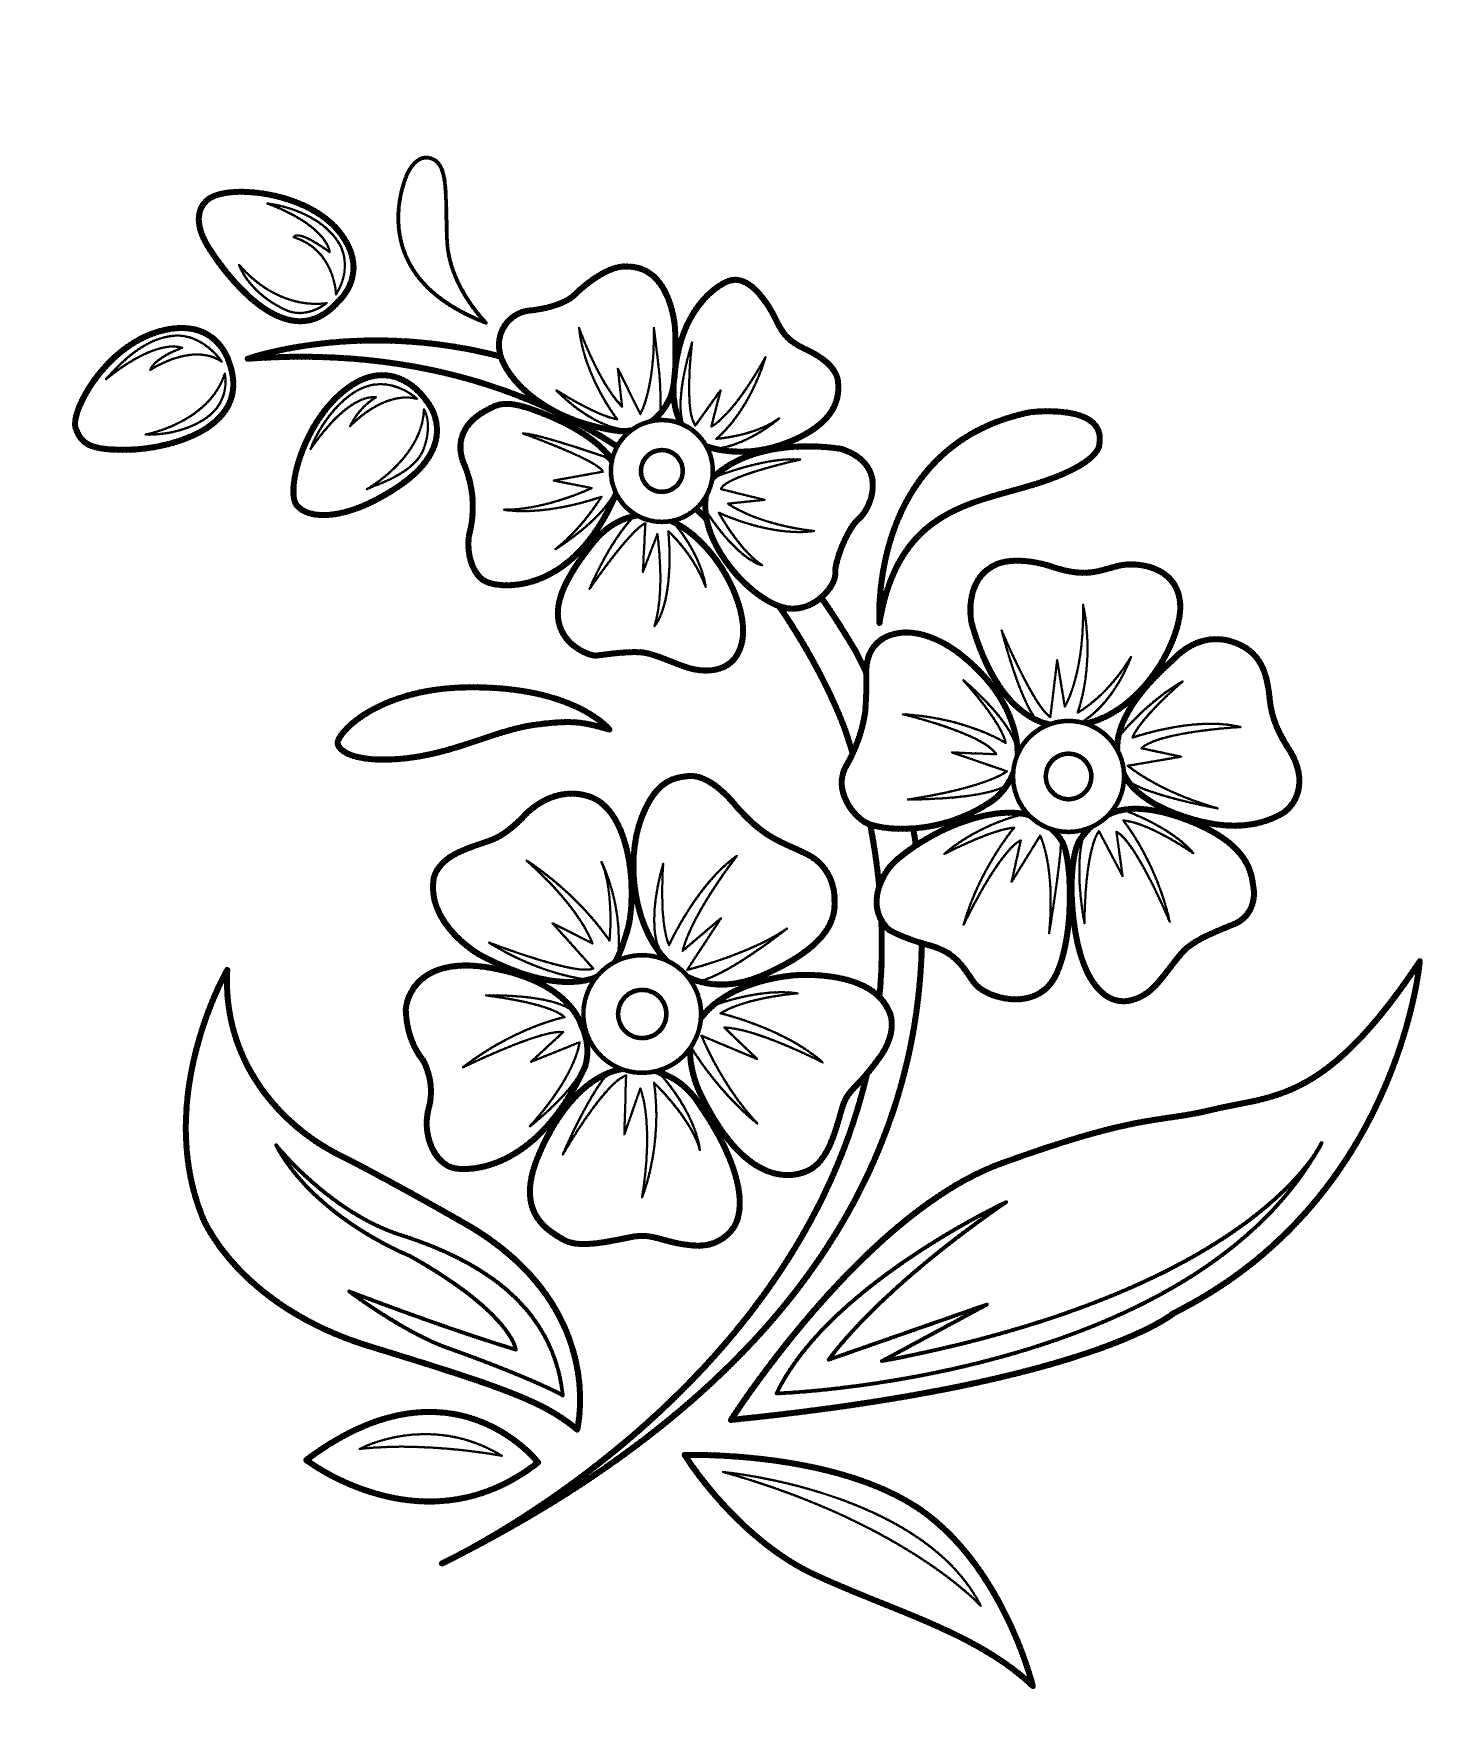 easy doodle flowers